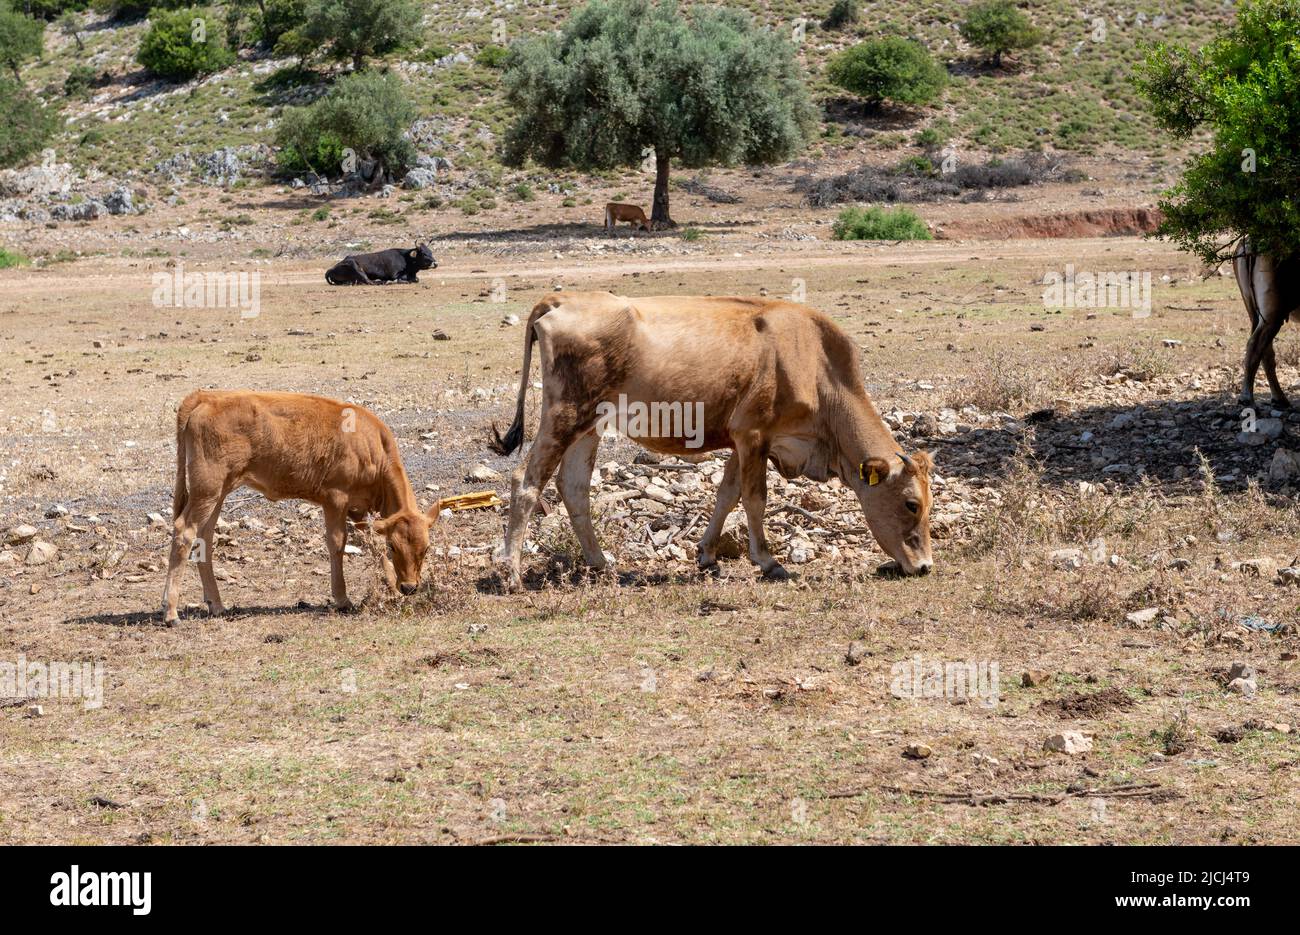 A cow and with a calf grazing in open field. Stock Photo